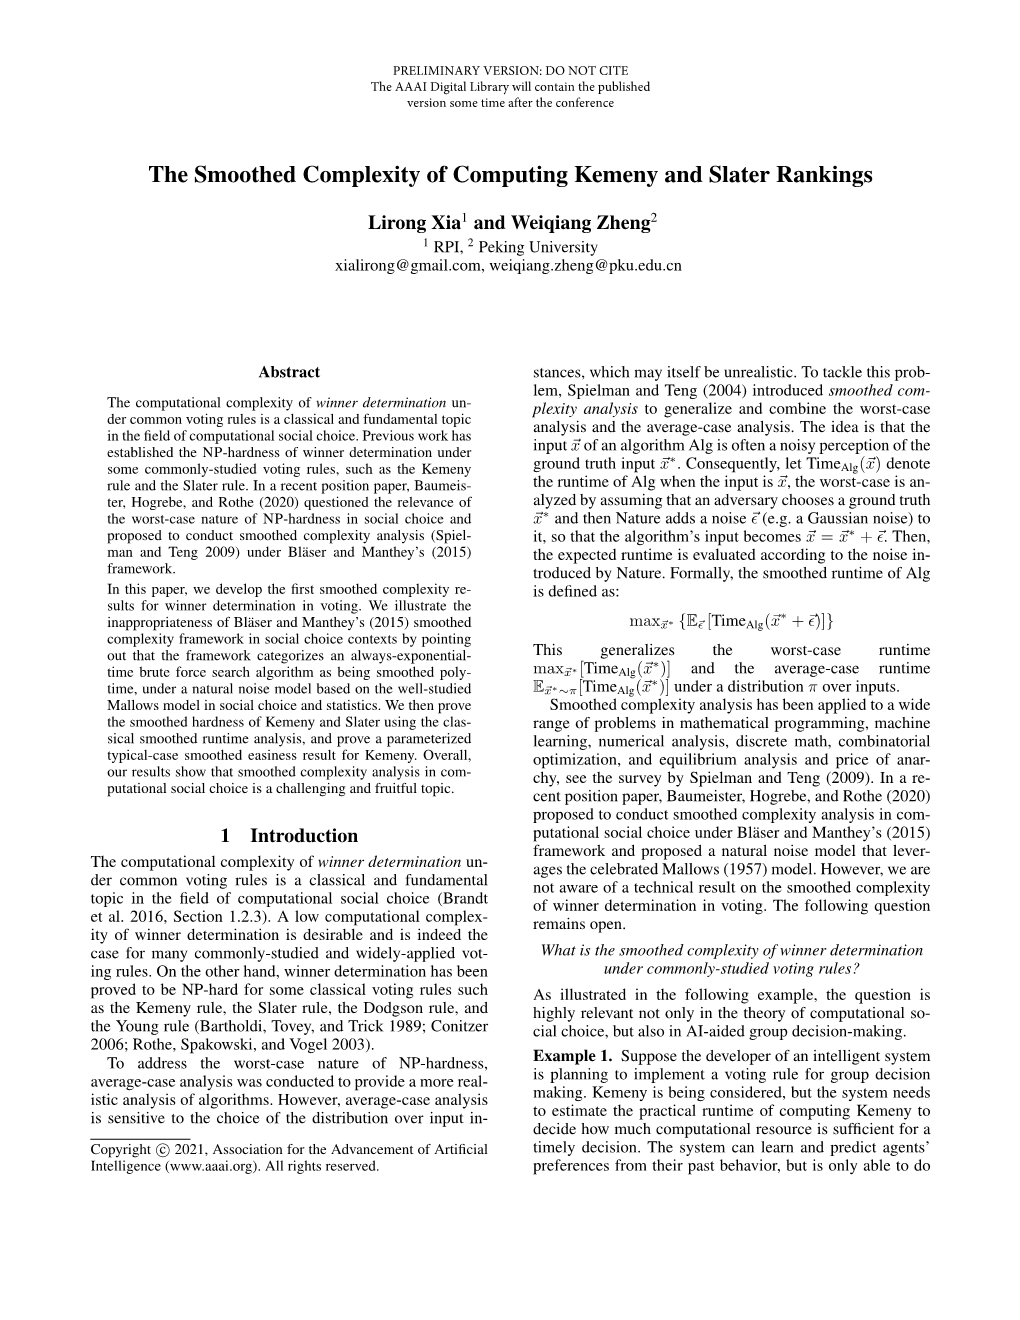 The Smoothed Complexity of Computing Kemeny and Slater Rankings